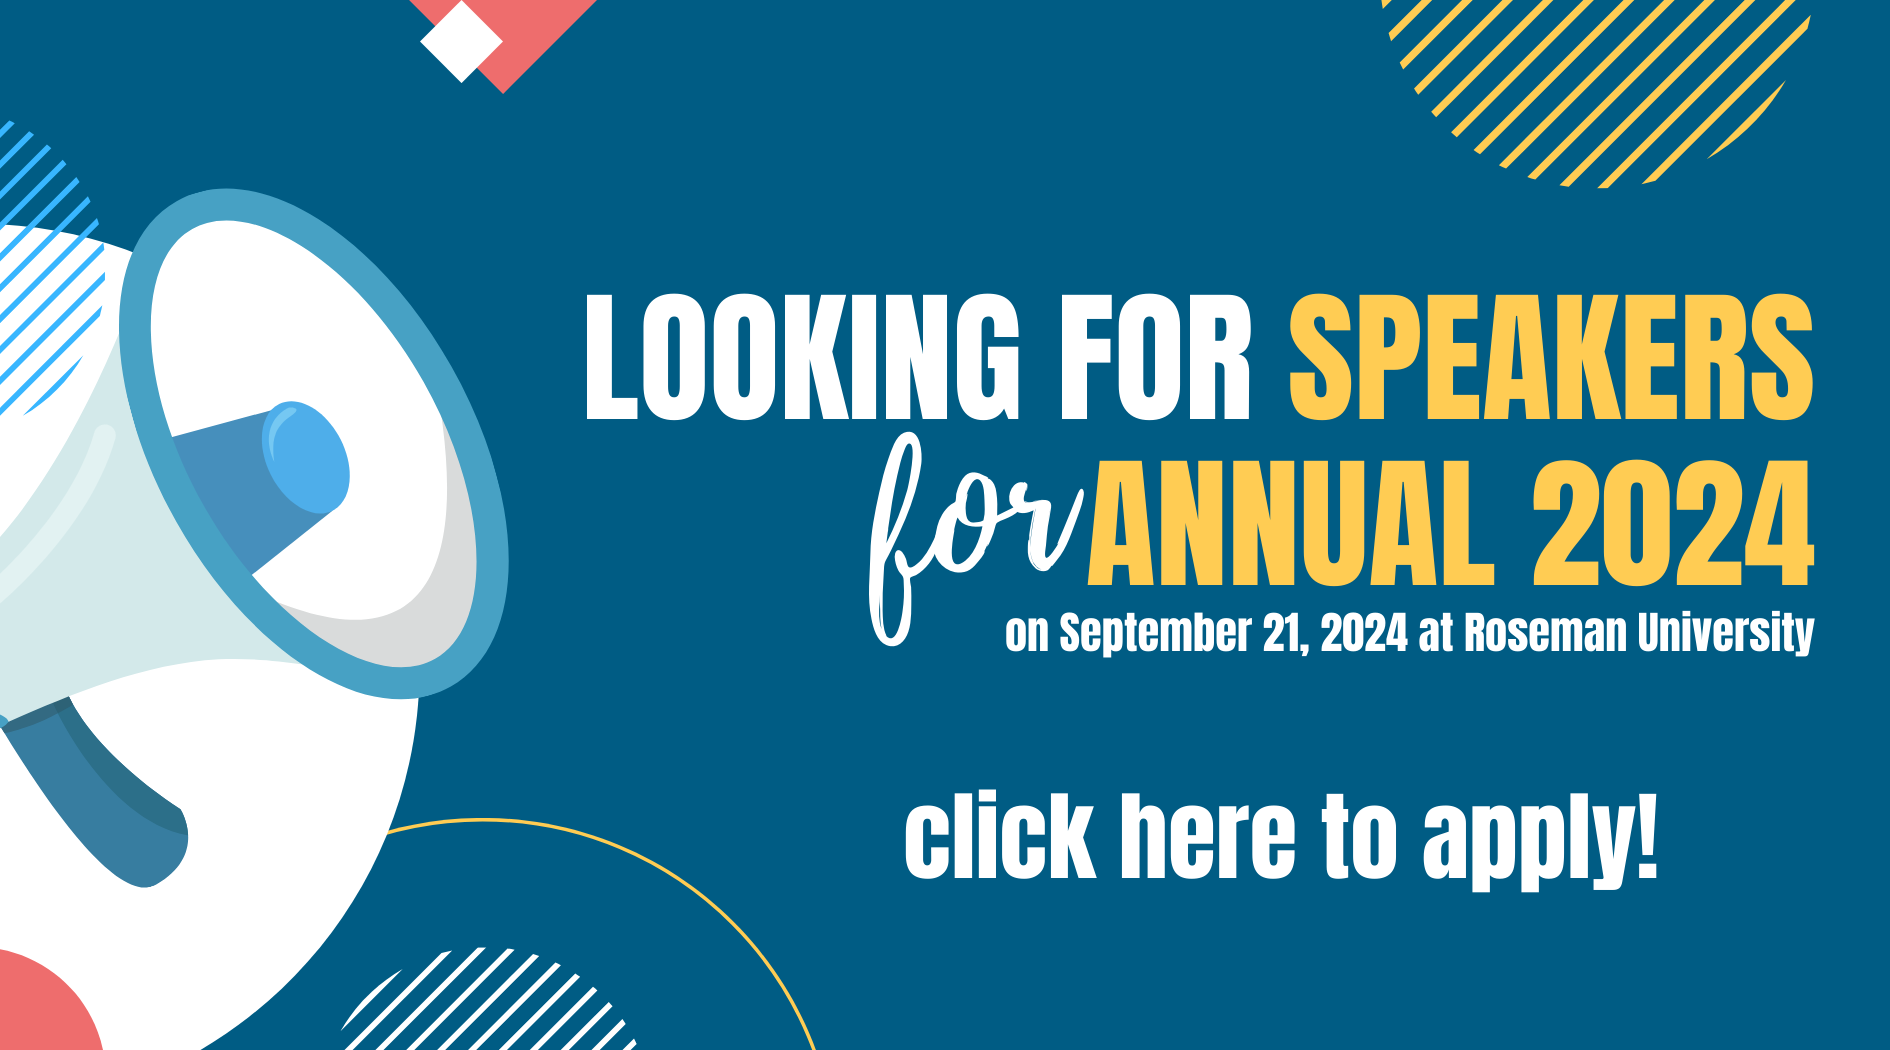 Looking for speakers for Annual 2024 - click here to apply